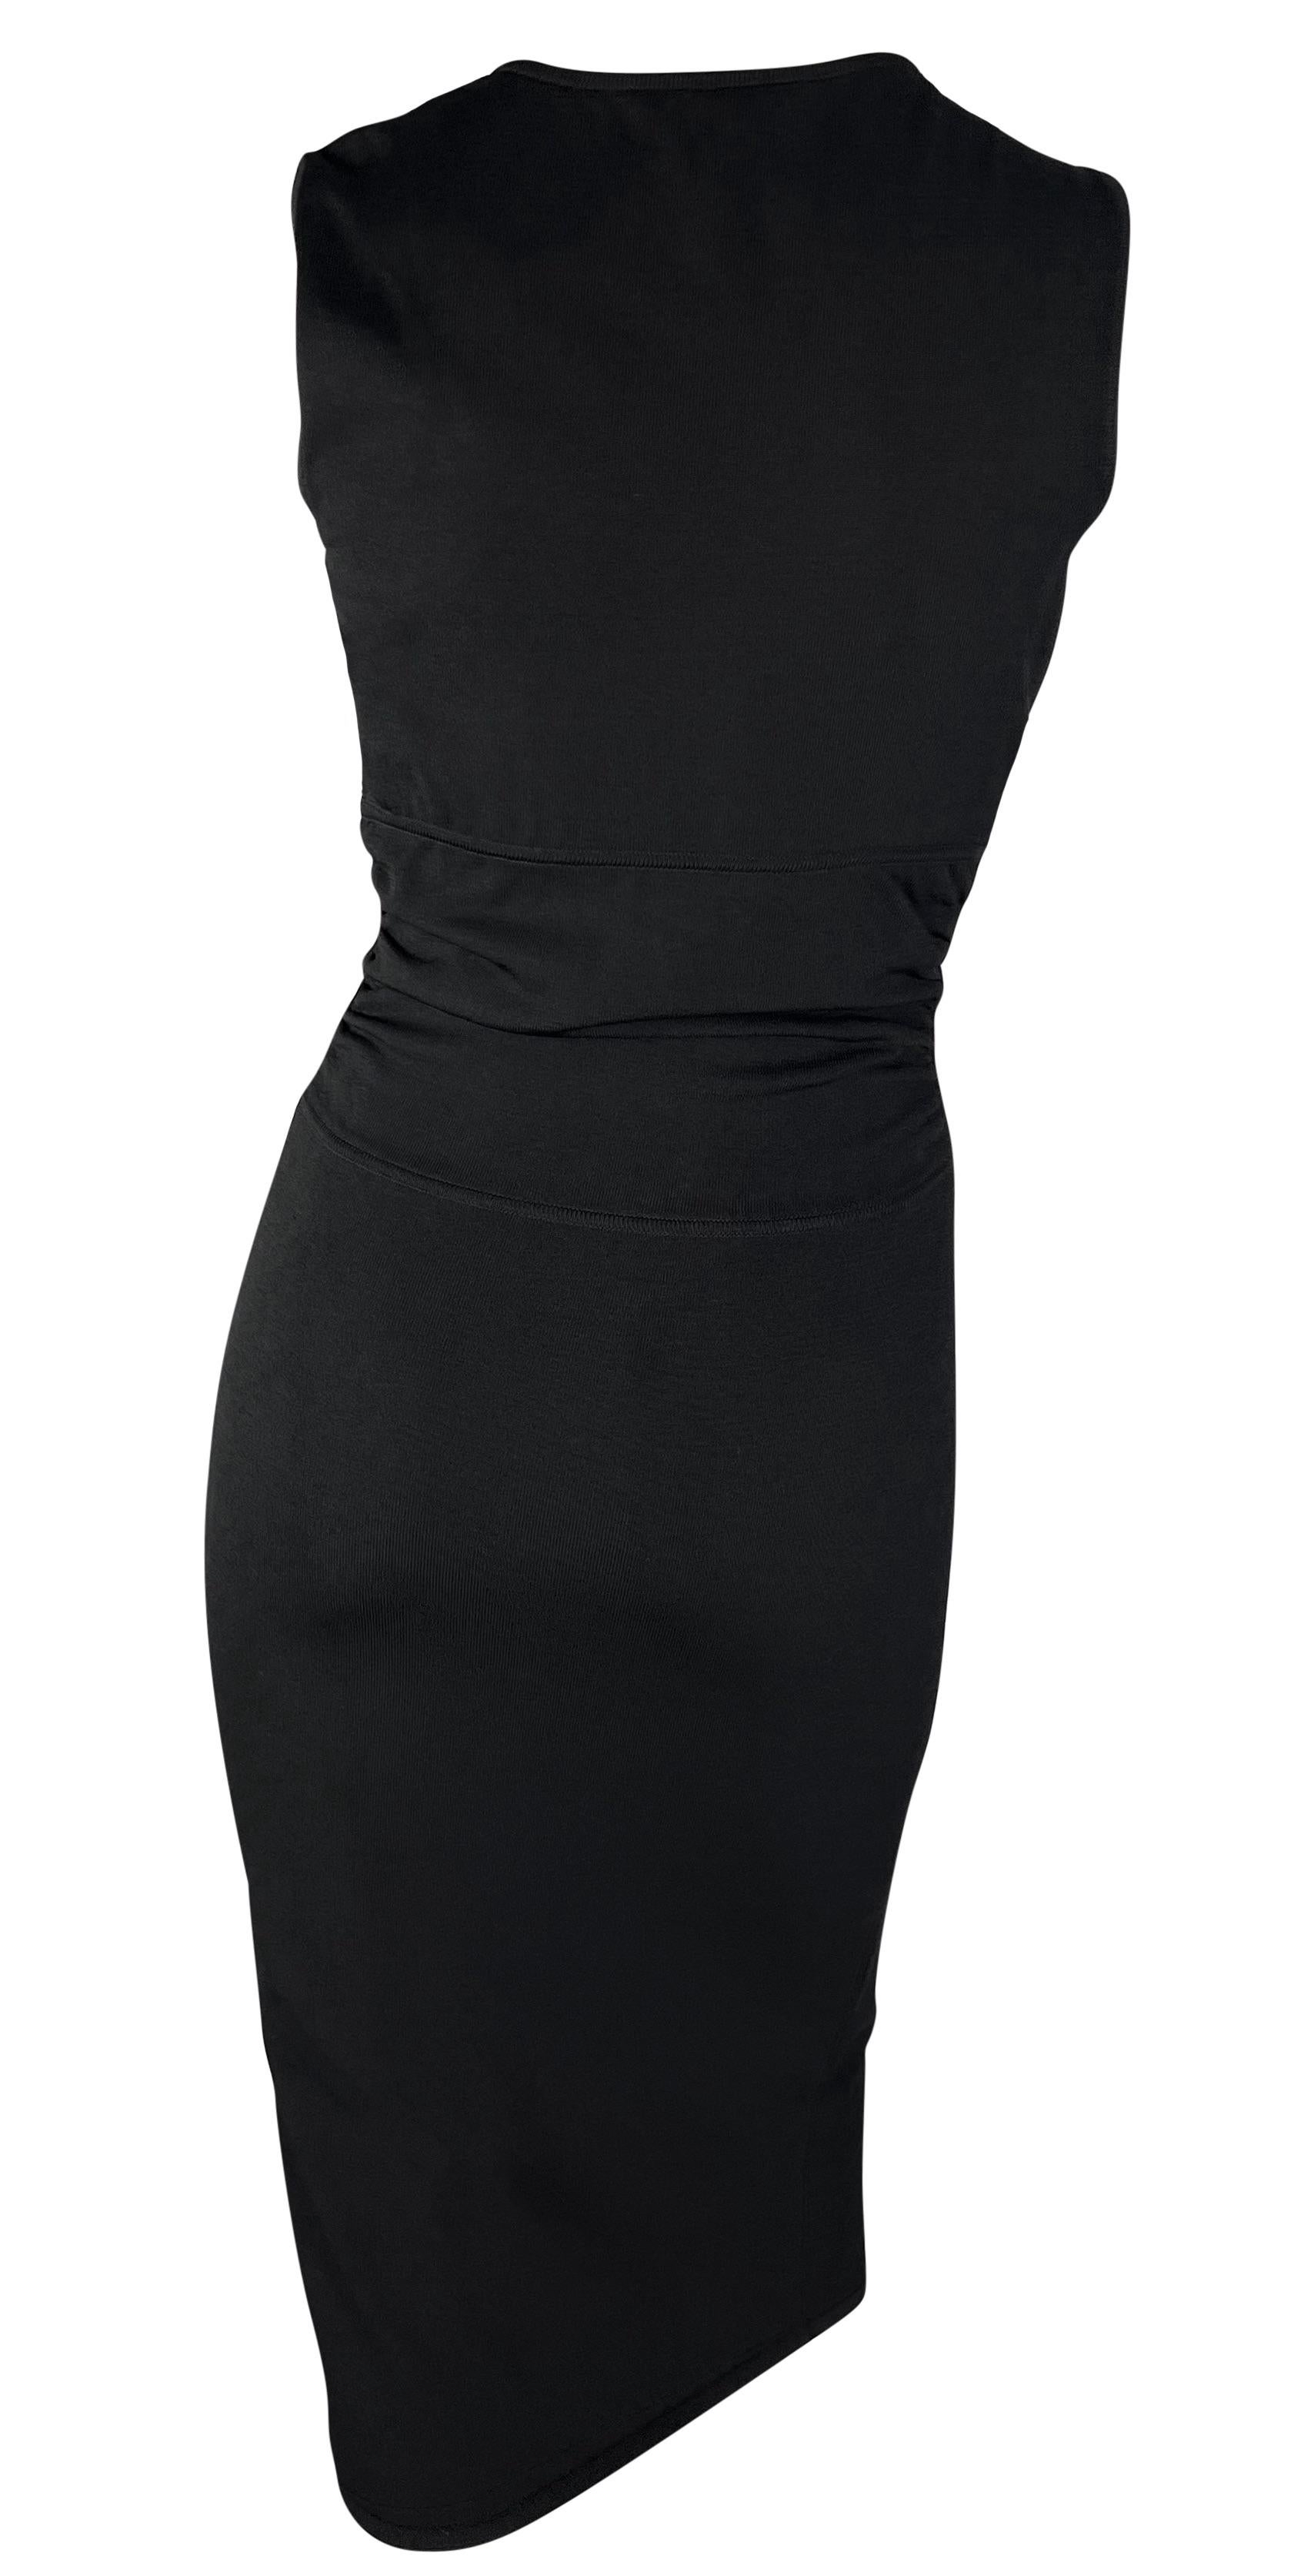 S/S 2000 Gucci by Tom Ford Black Stretch Knit Leather Bow Sleeveless Dress For Sale 1